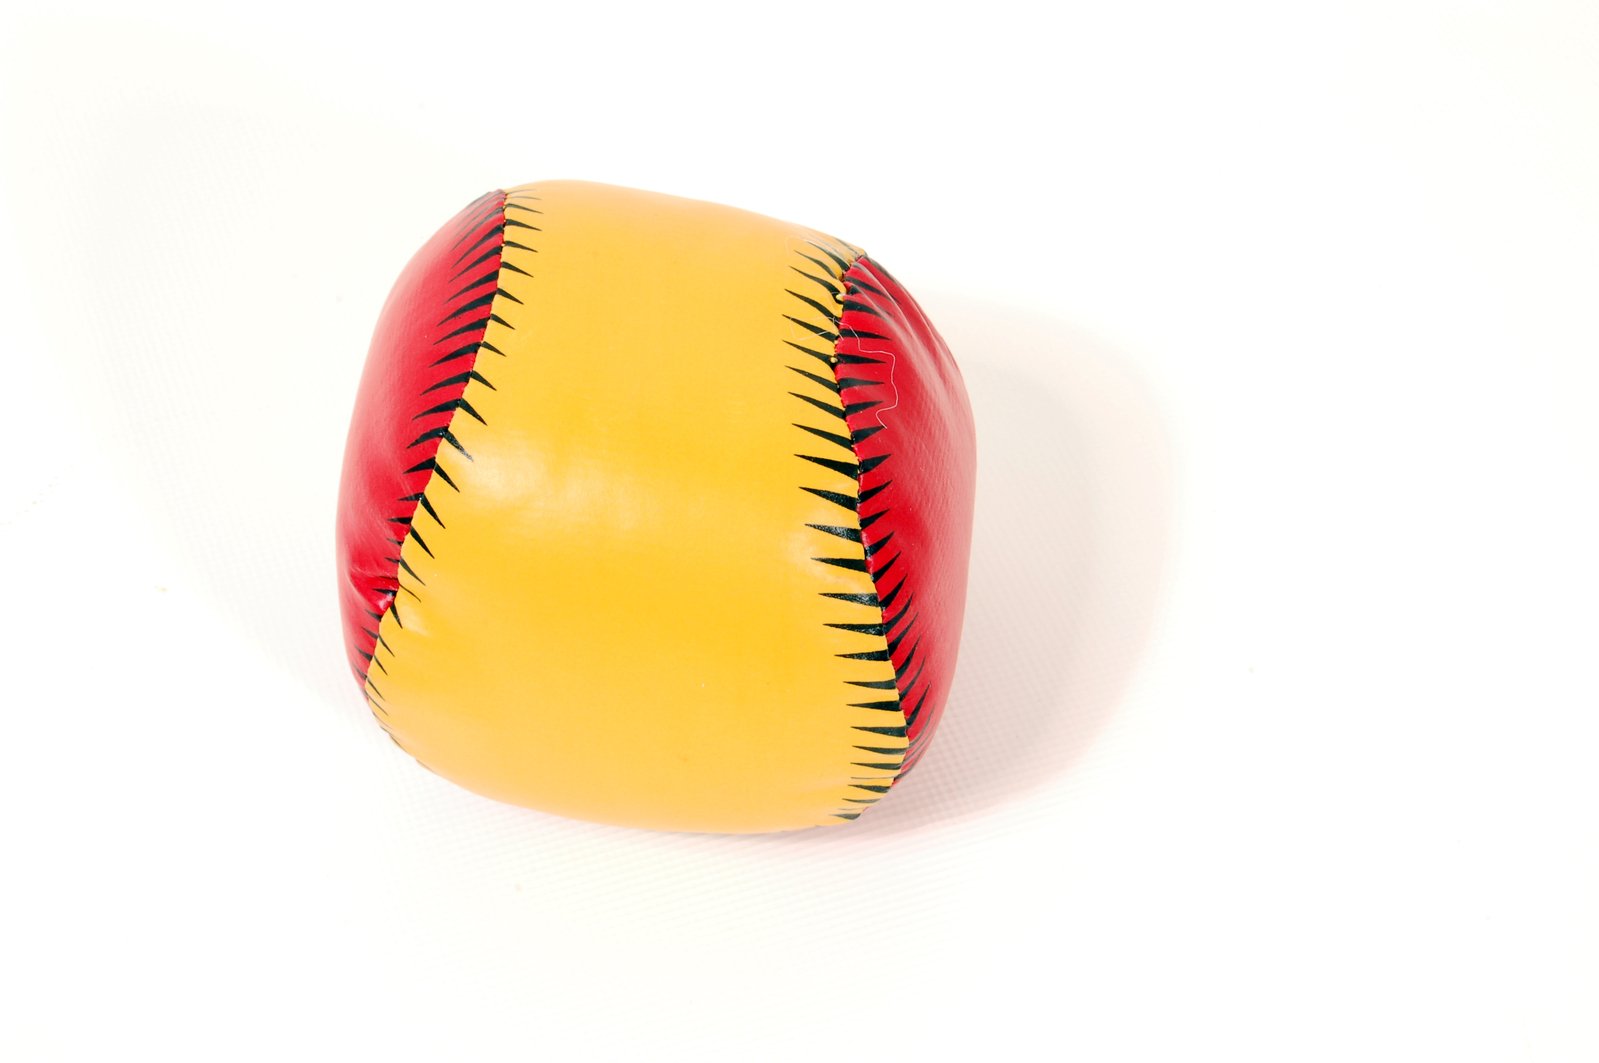 a toy baseball with spikes, laying on a white surface